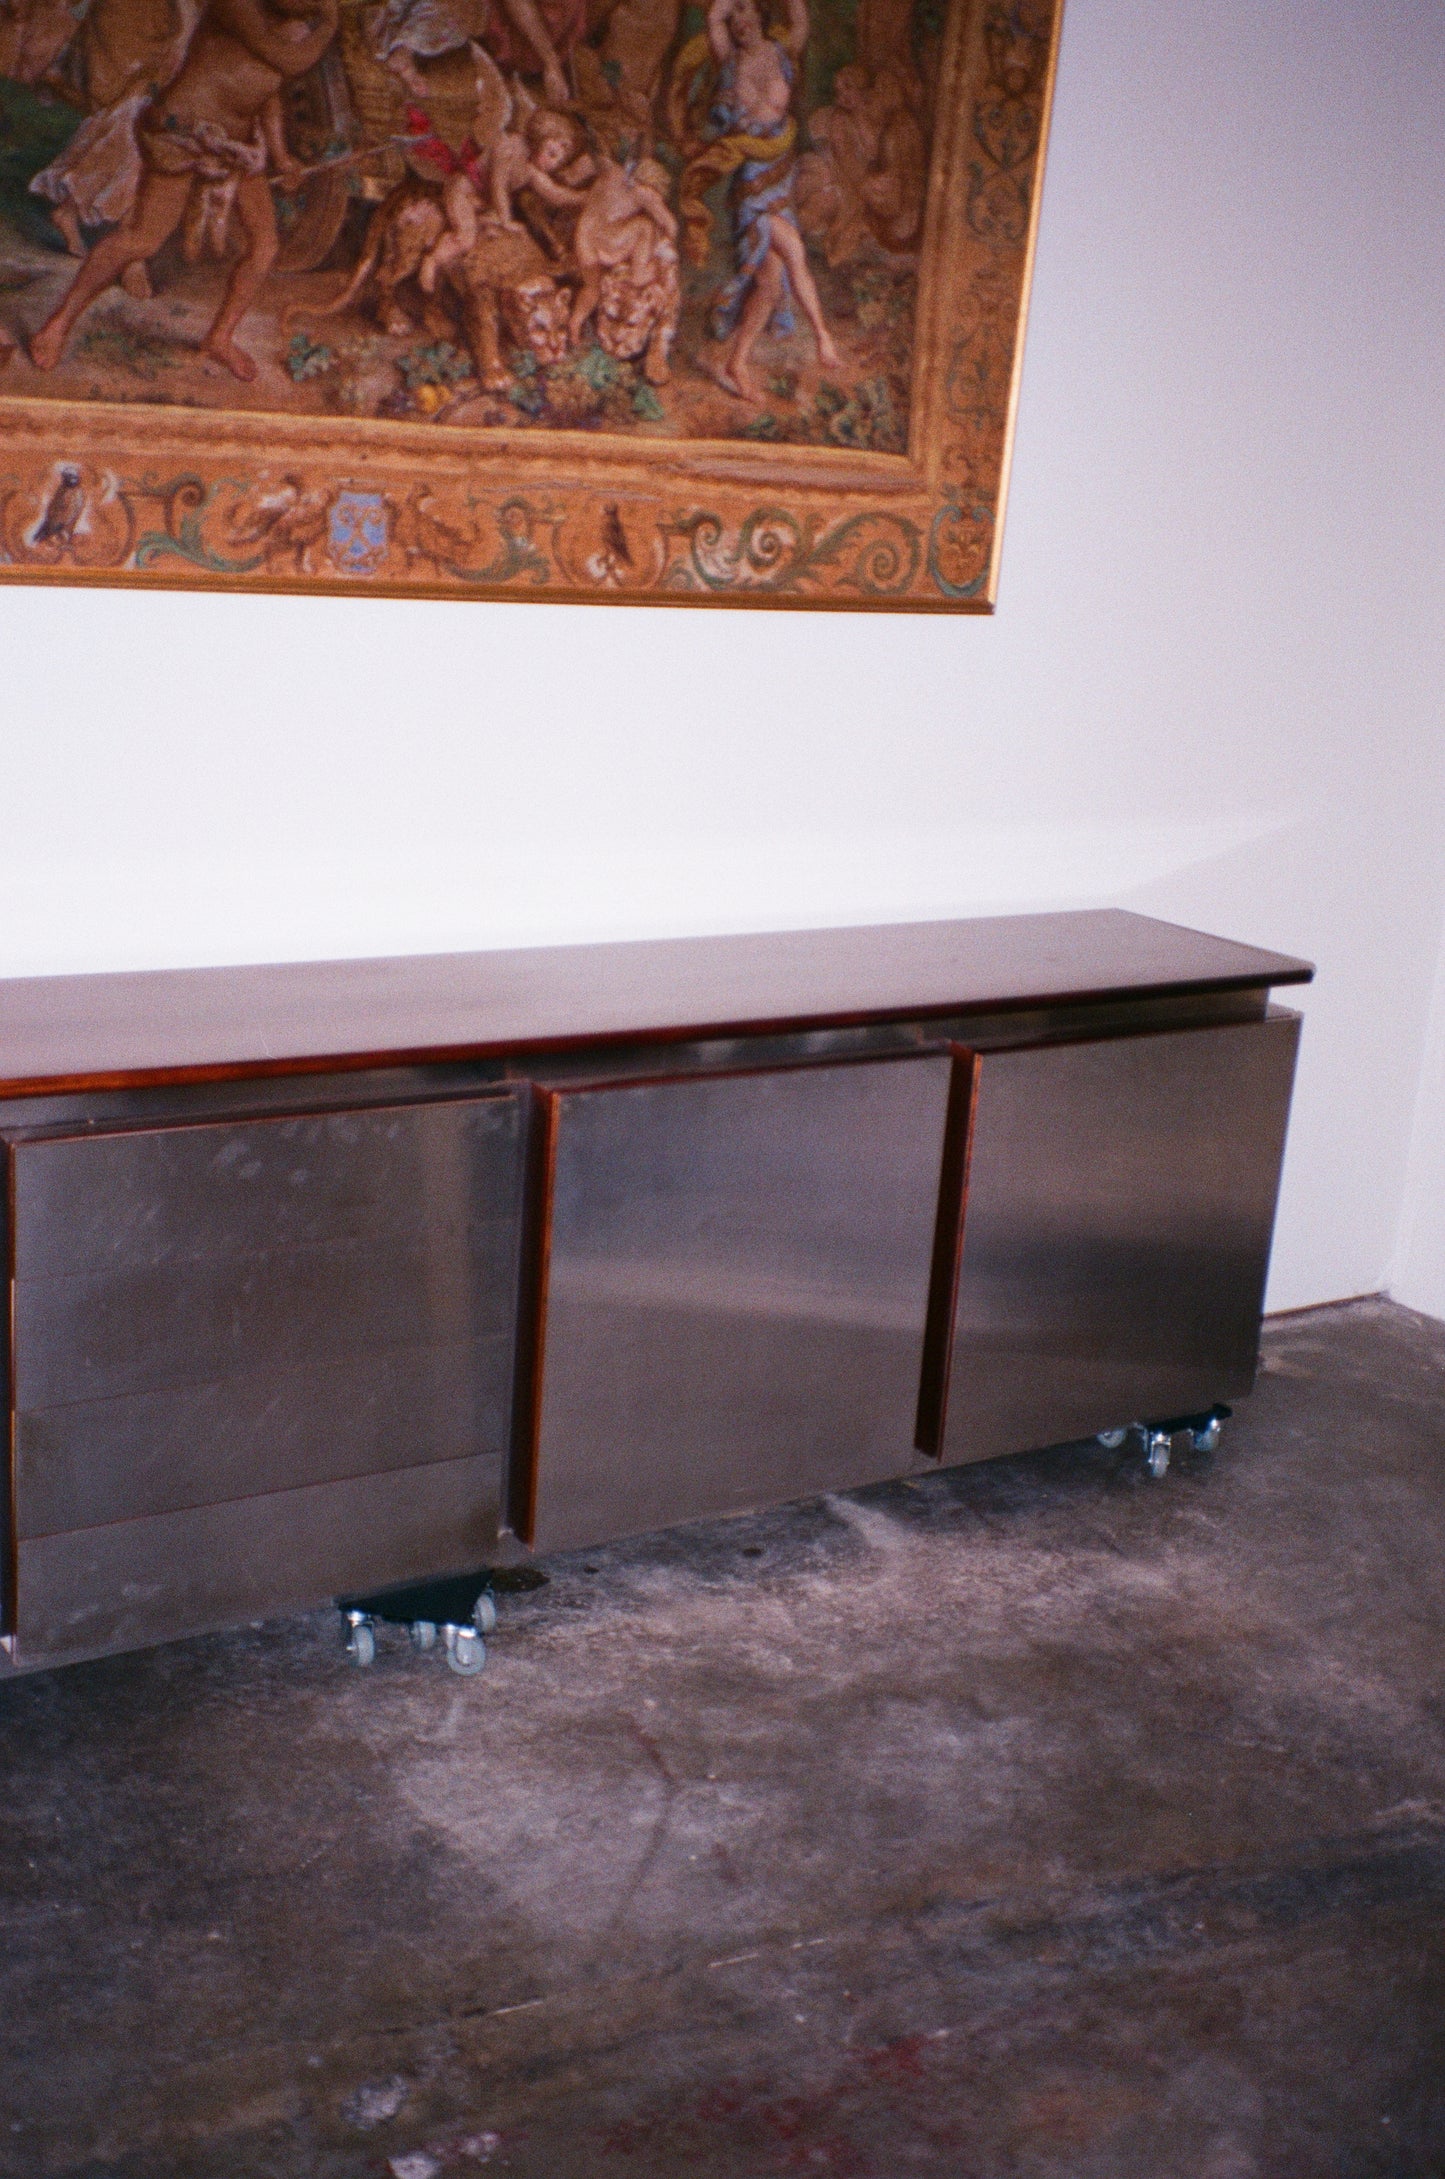 Sideboard, Stoppino for Acerbis, 1970s